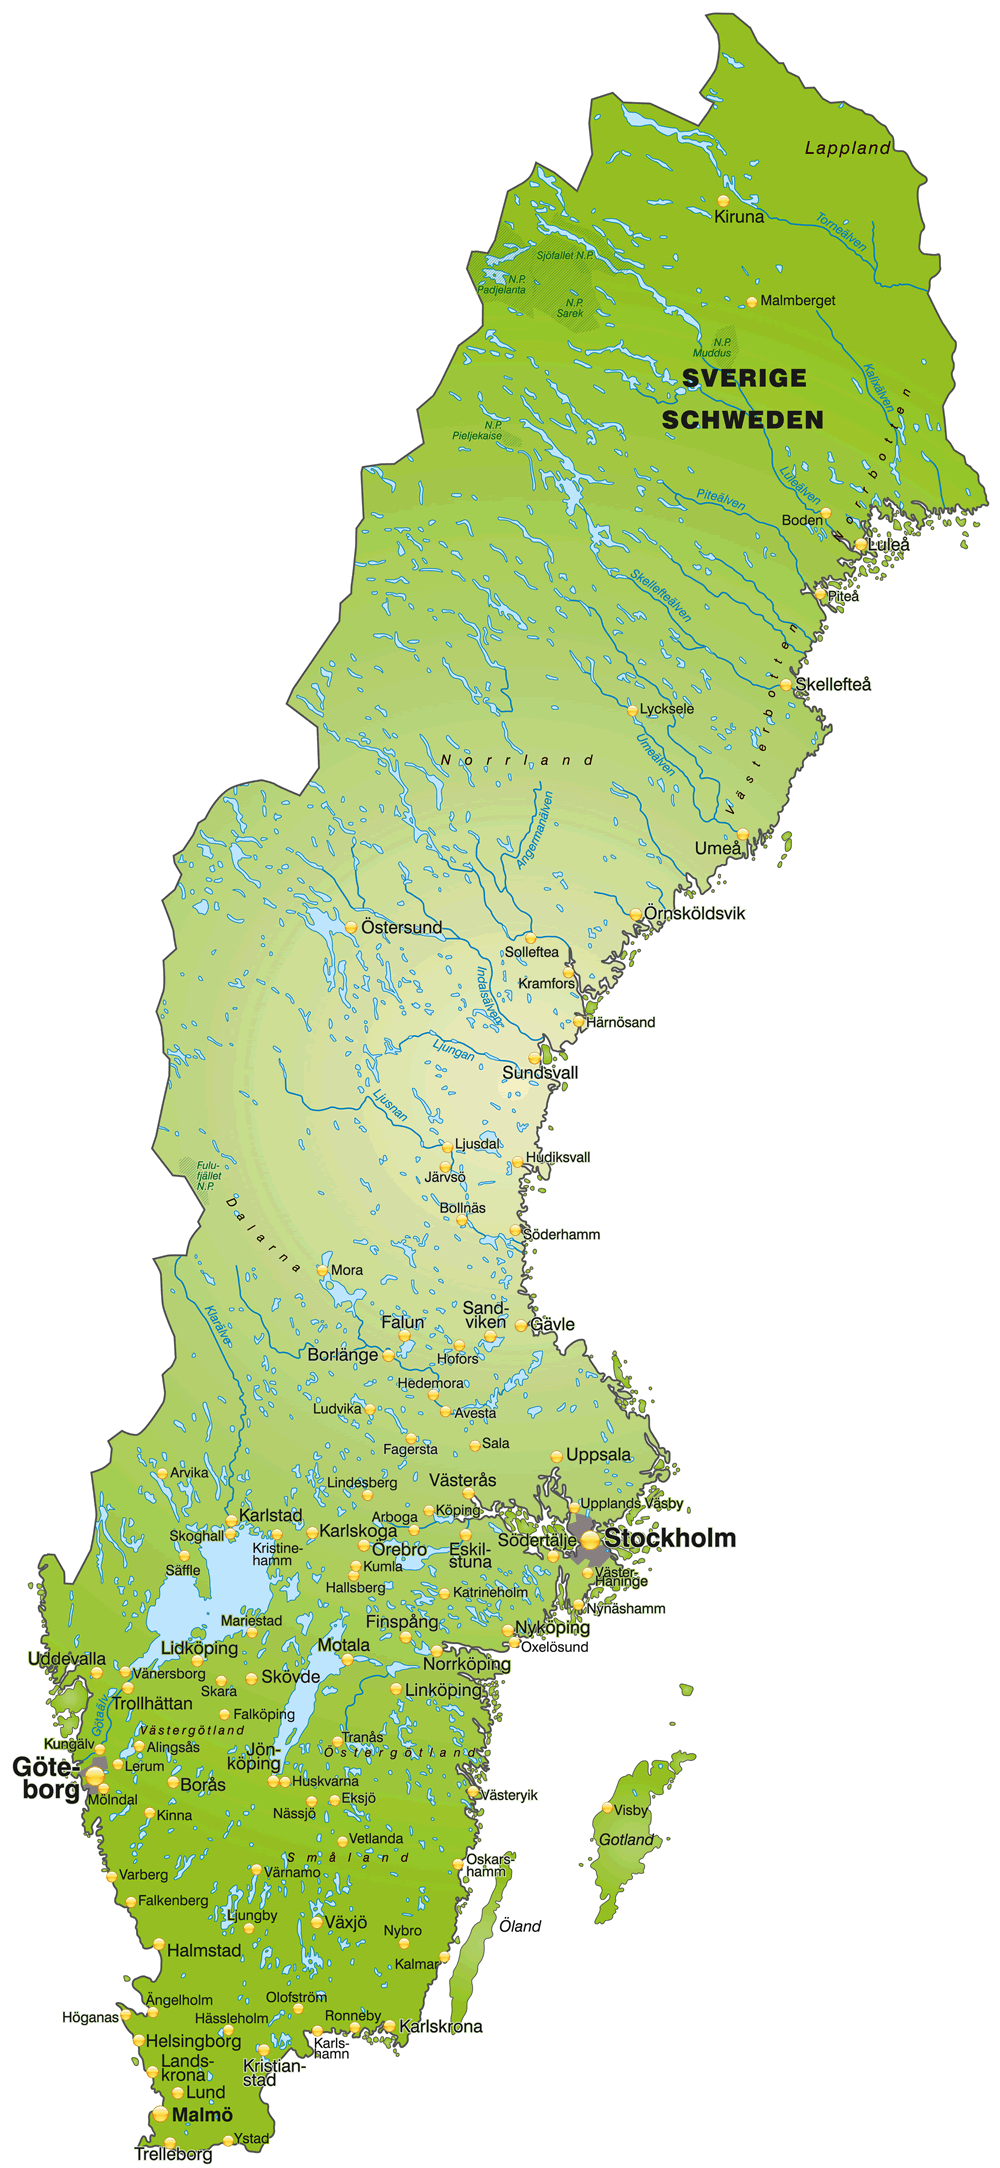 Overview map of Sweden